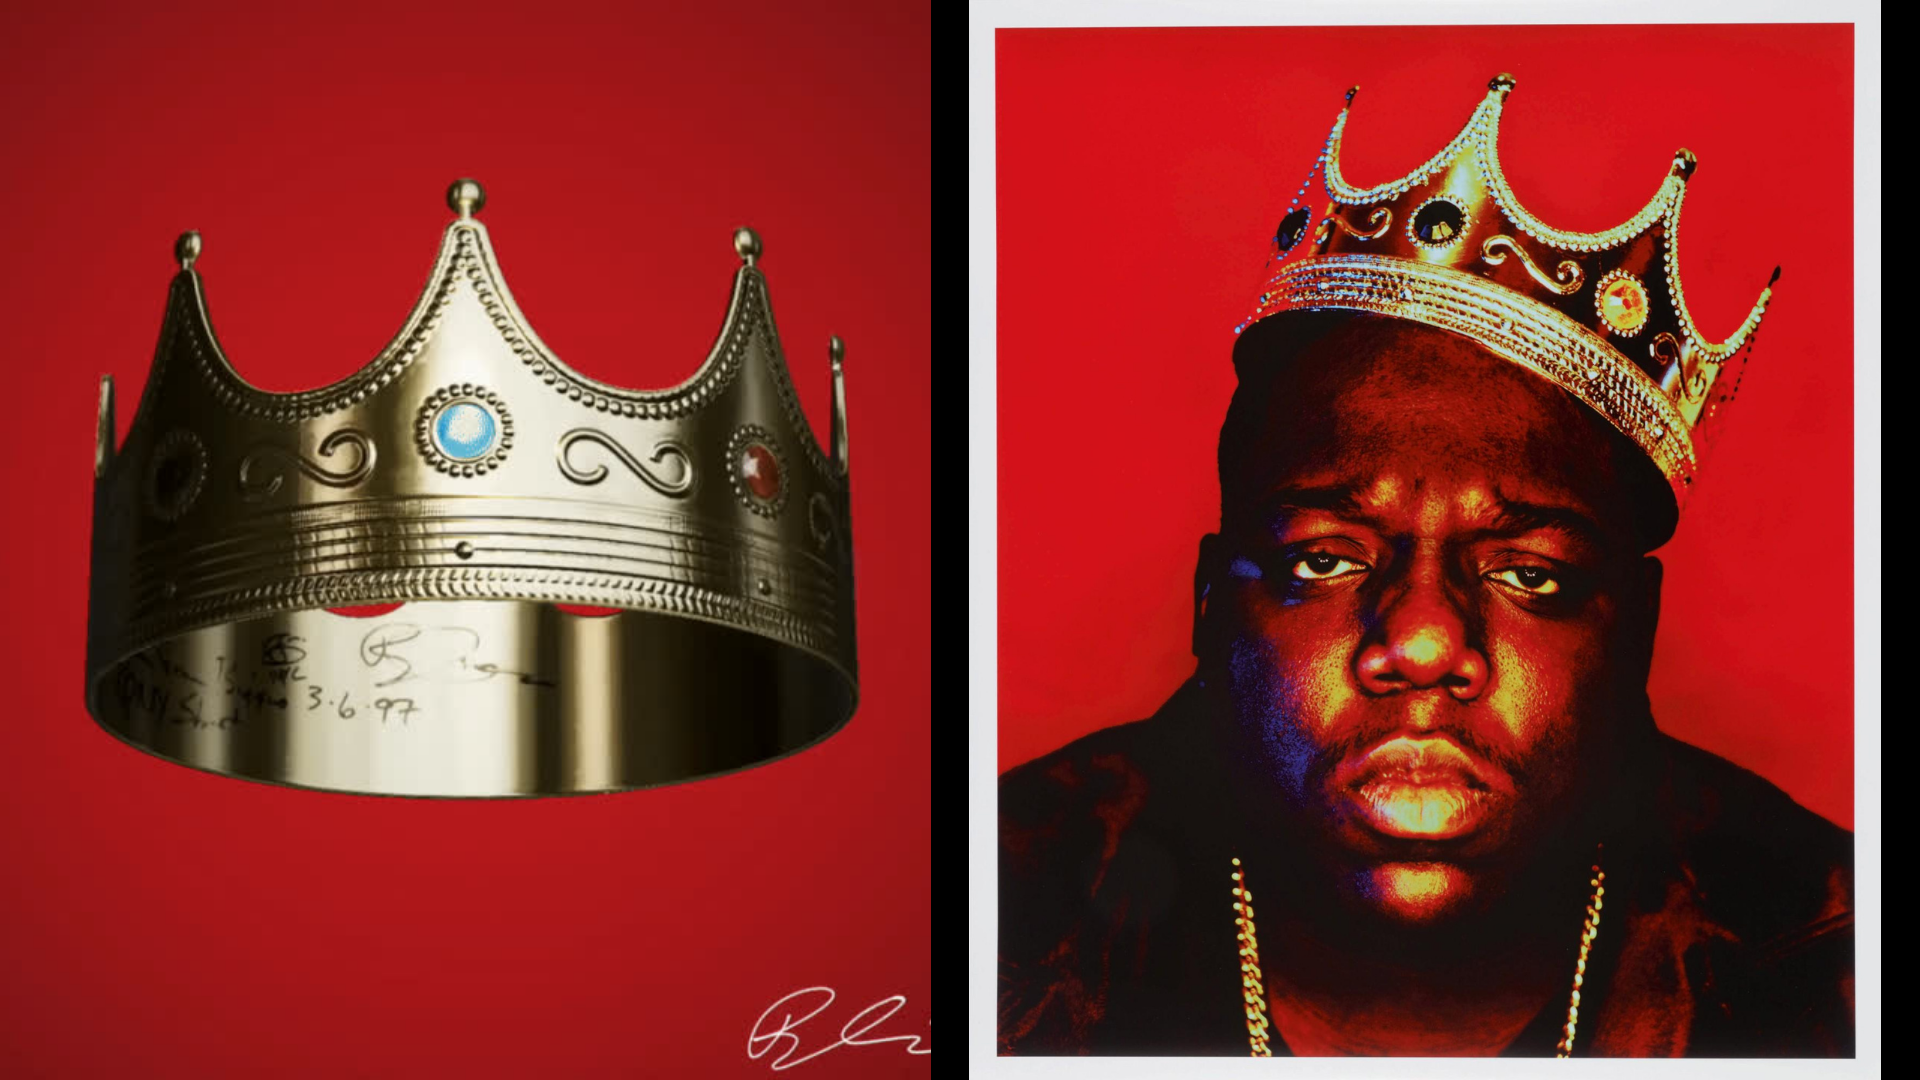 notorious BIG wearing the crown, next to the crown NFT